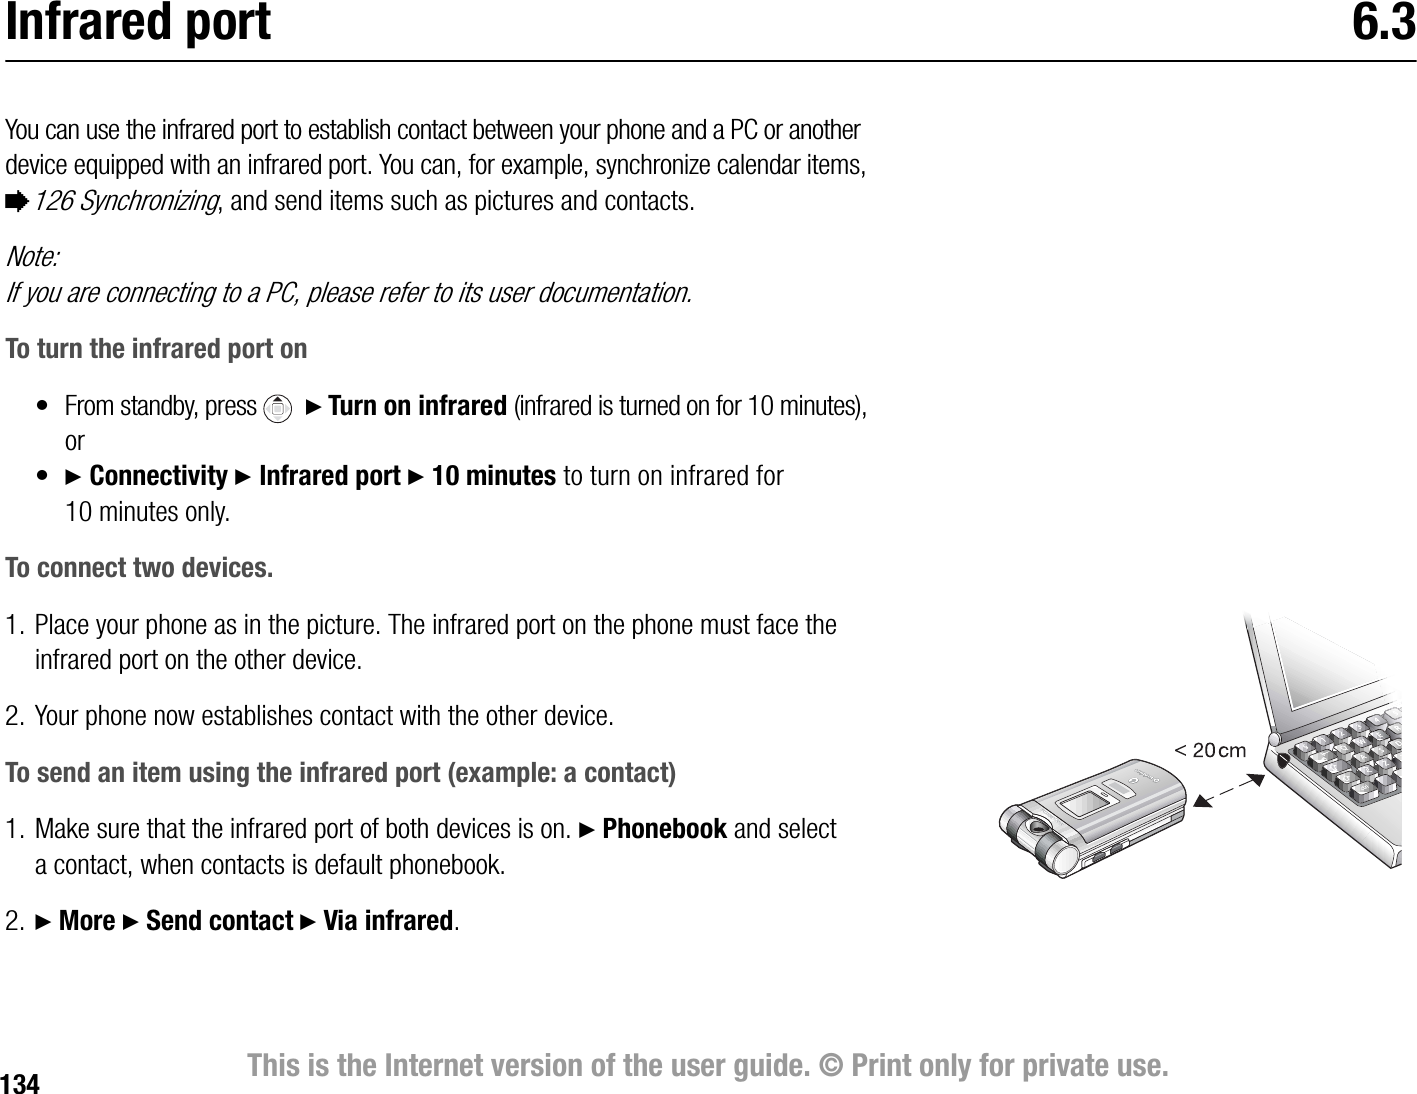 134 This is the Internet version of the user guide. © Print only for private use.Infrared port 6.3You can use the infrared port to establish contact between your phone and a PC or another device equipped with an infrared port. You can, for example, synchronize calendar items, %126 Synchronizing, and send items such as pictures and contacts. Note:If you are connecting to a PC, please refer to its user documentation.To turn the infrared port on• From standby, press    } Turn on infrared (infrared is turned on for 10 minutes), or•} Connectivity } Infrared port } 10 minutes to turn on infrared for 10 minutes only.To connect two devices.1. Place your phone as in the picture. The infrared port on the phone must face the infrared port on the other device.2. Your phone now establishes contact with the other device.To send an item using the infrared port (example: a contact)1. Make sure that the infrared port of both devices is on. } Phonebook and select a contact, when contacts is default phonebook.2. } More } Send contact } Via infrared.